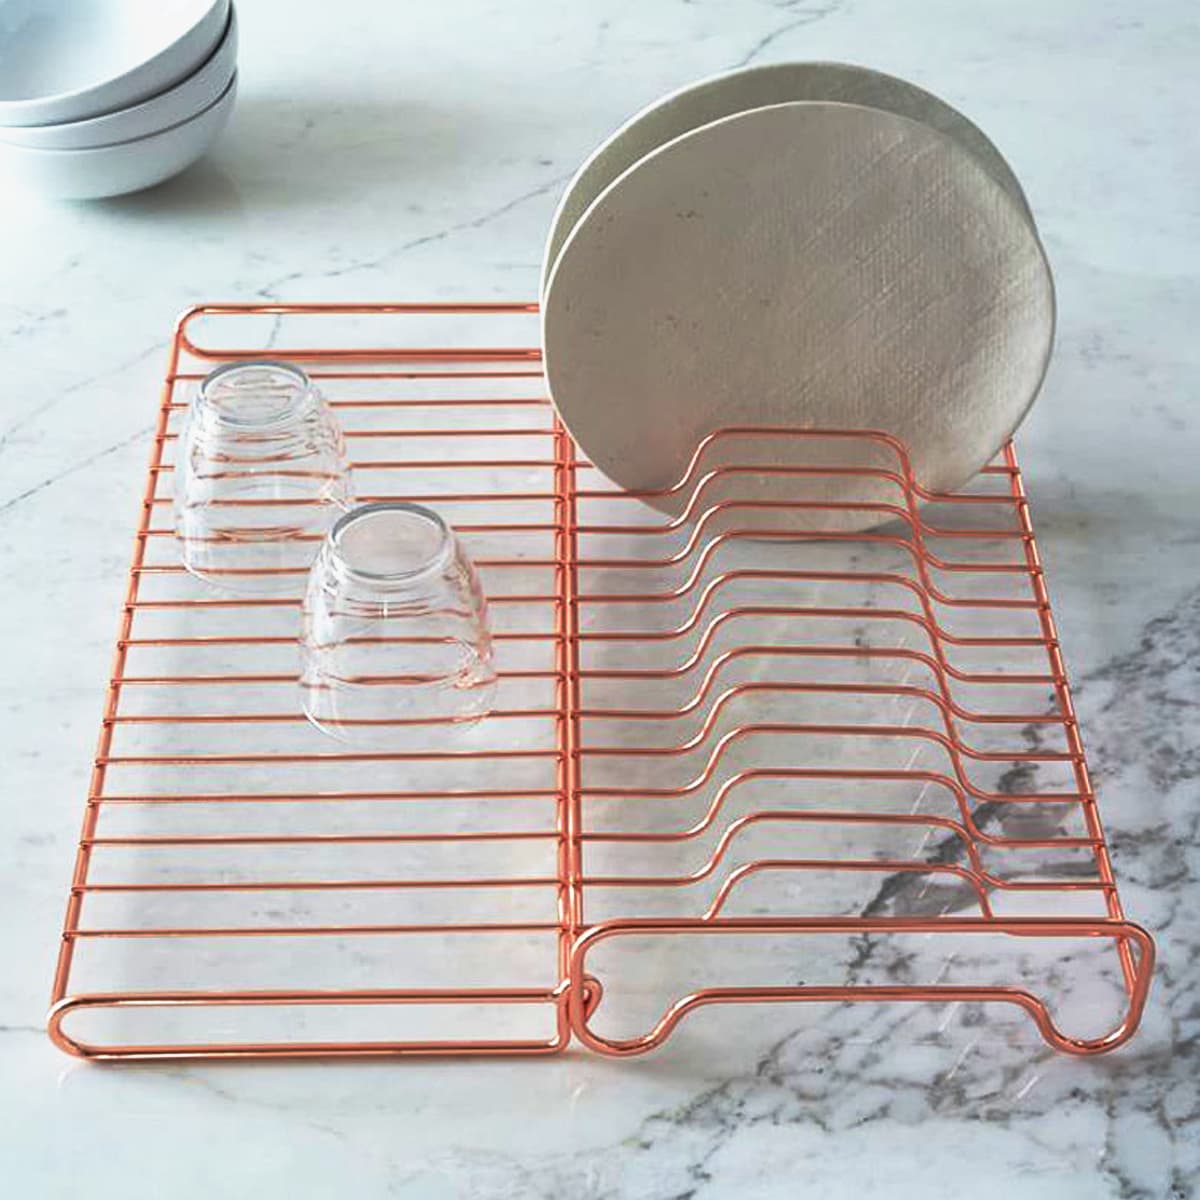 10 Dish Drying Racks That Are Better than a Tea Towel